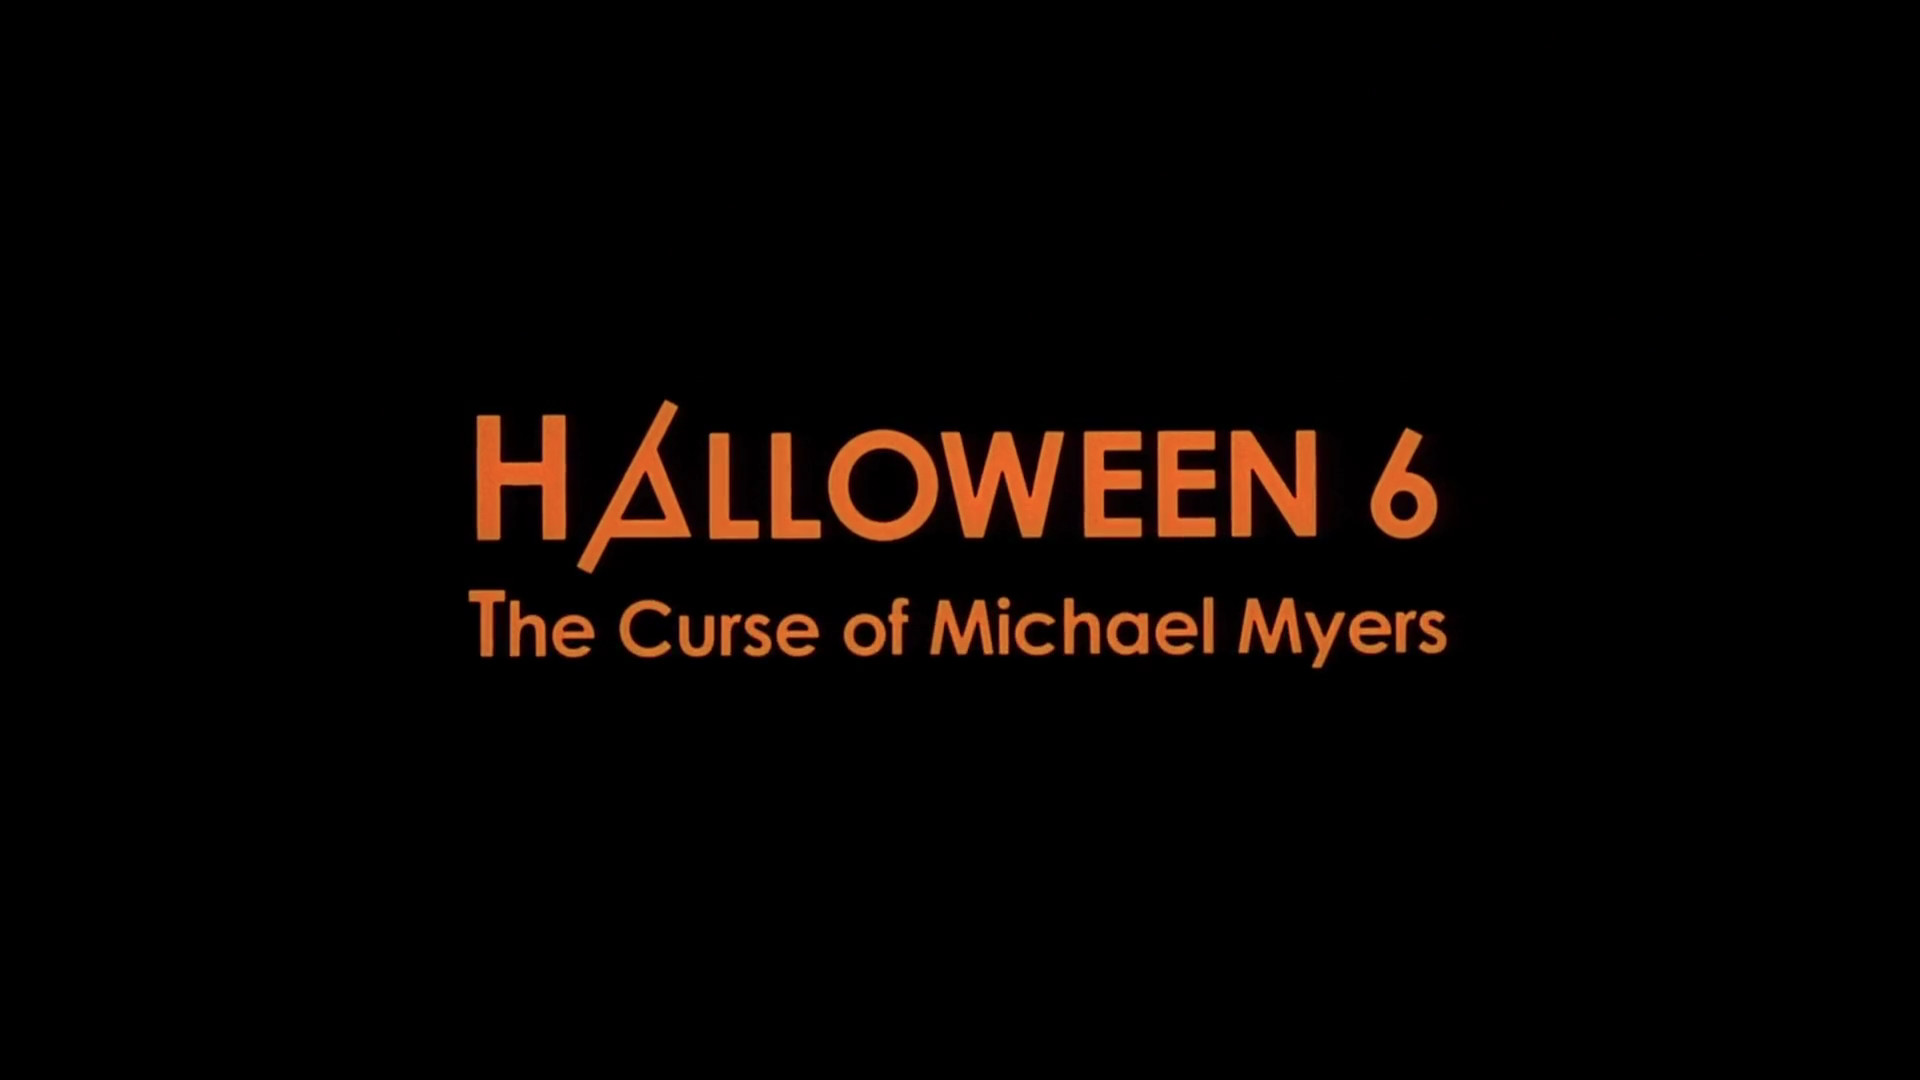 1920x1080 Halloween 6 - The Curse of Michael Myers